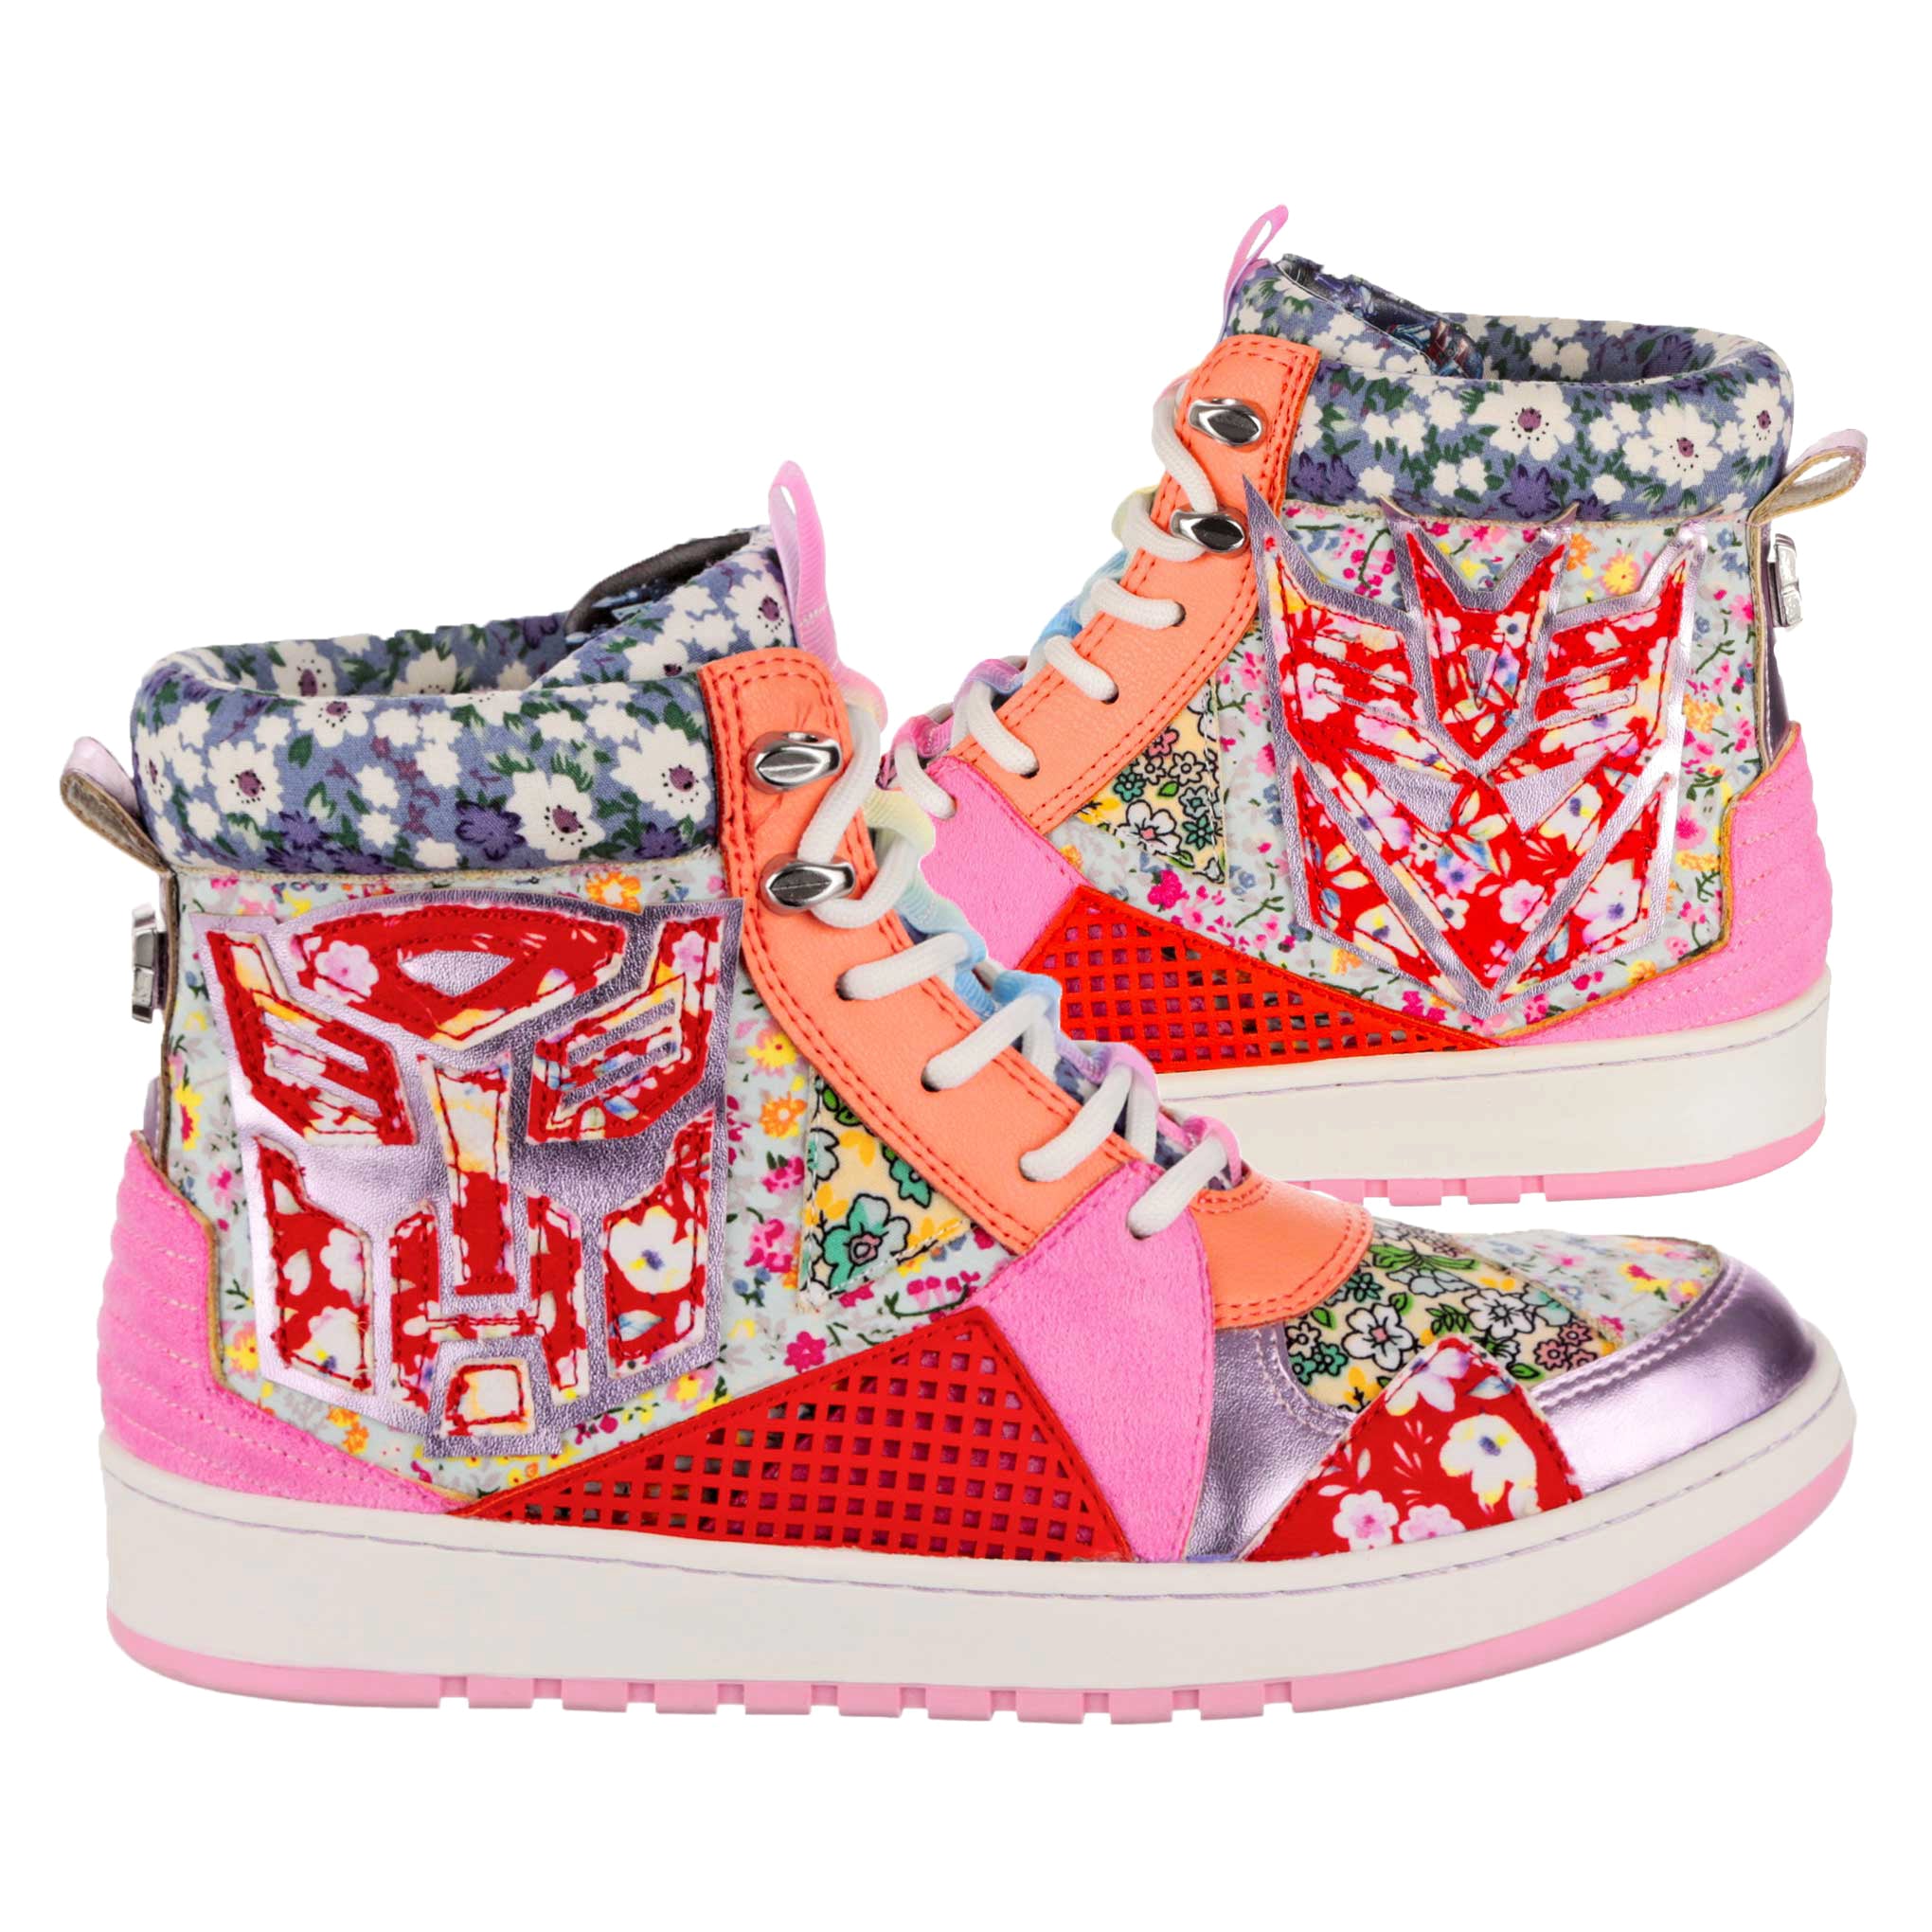 A pair of lace-up Transformers inspired high top trainers sit side by side. Multicoloured retro floral prints are mixed with red, pink and orange details as well as a red embroidered Decepticon and Autobot logo on each boot. A white and pink chunky sole matches the white laces while a silver pull up tab sits at the back of the ankle boot. 